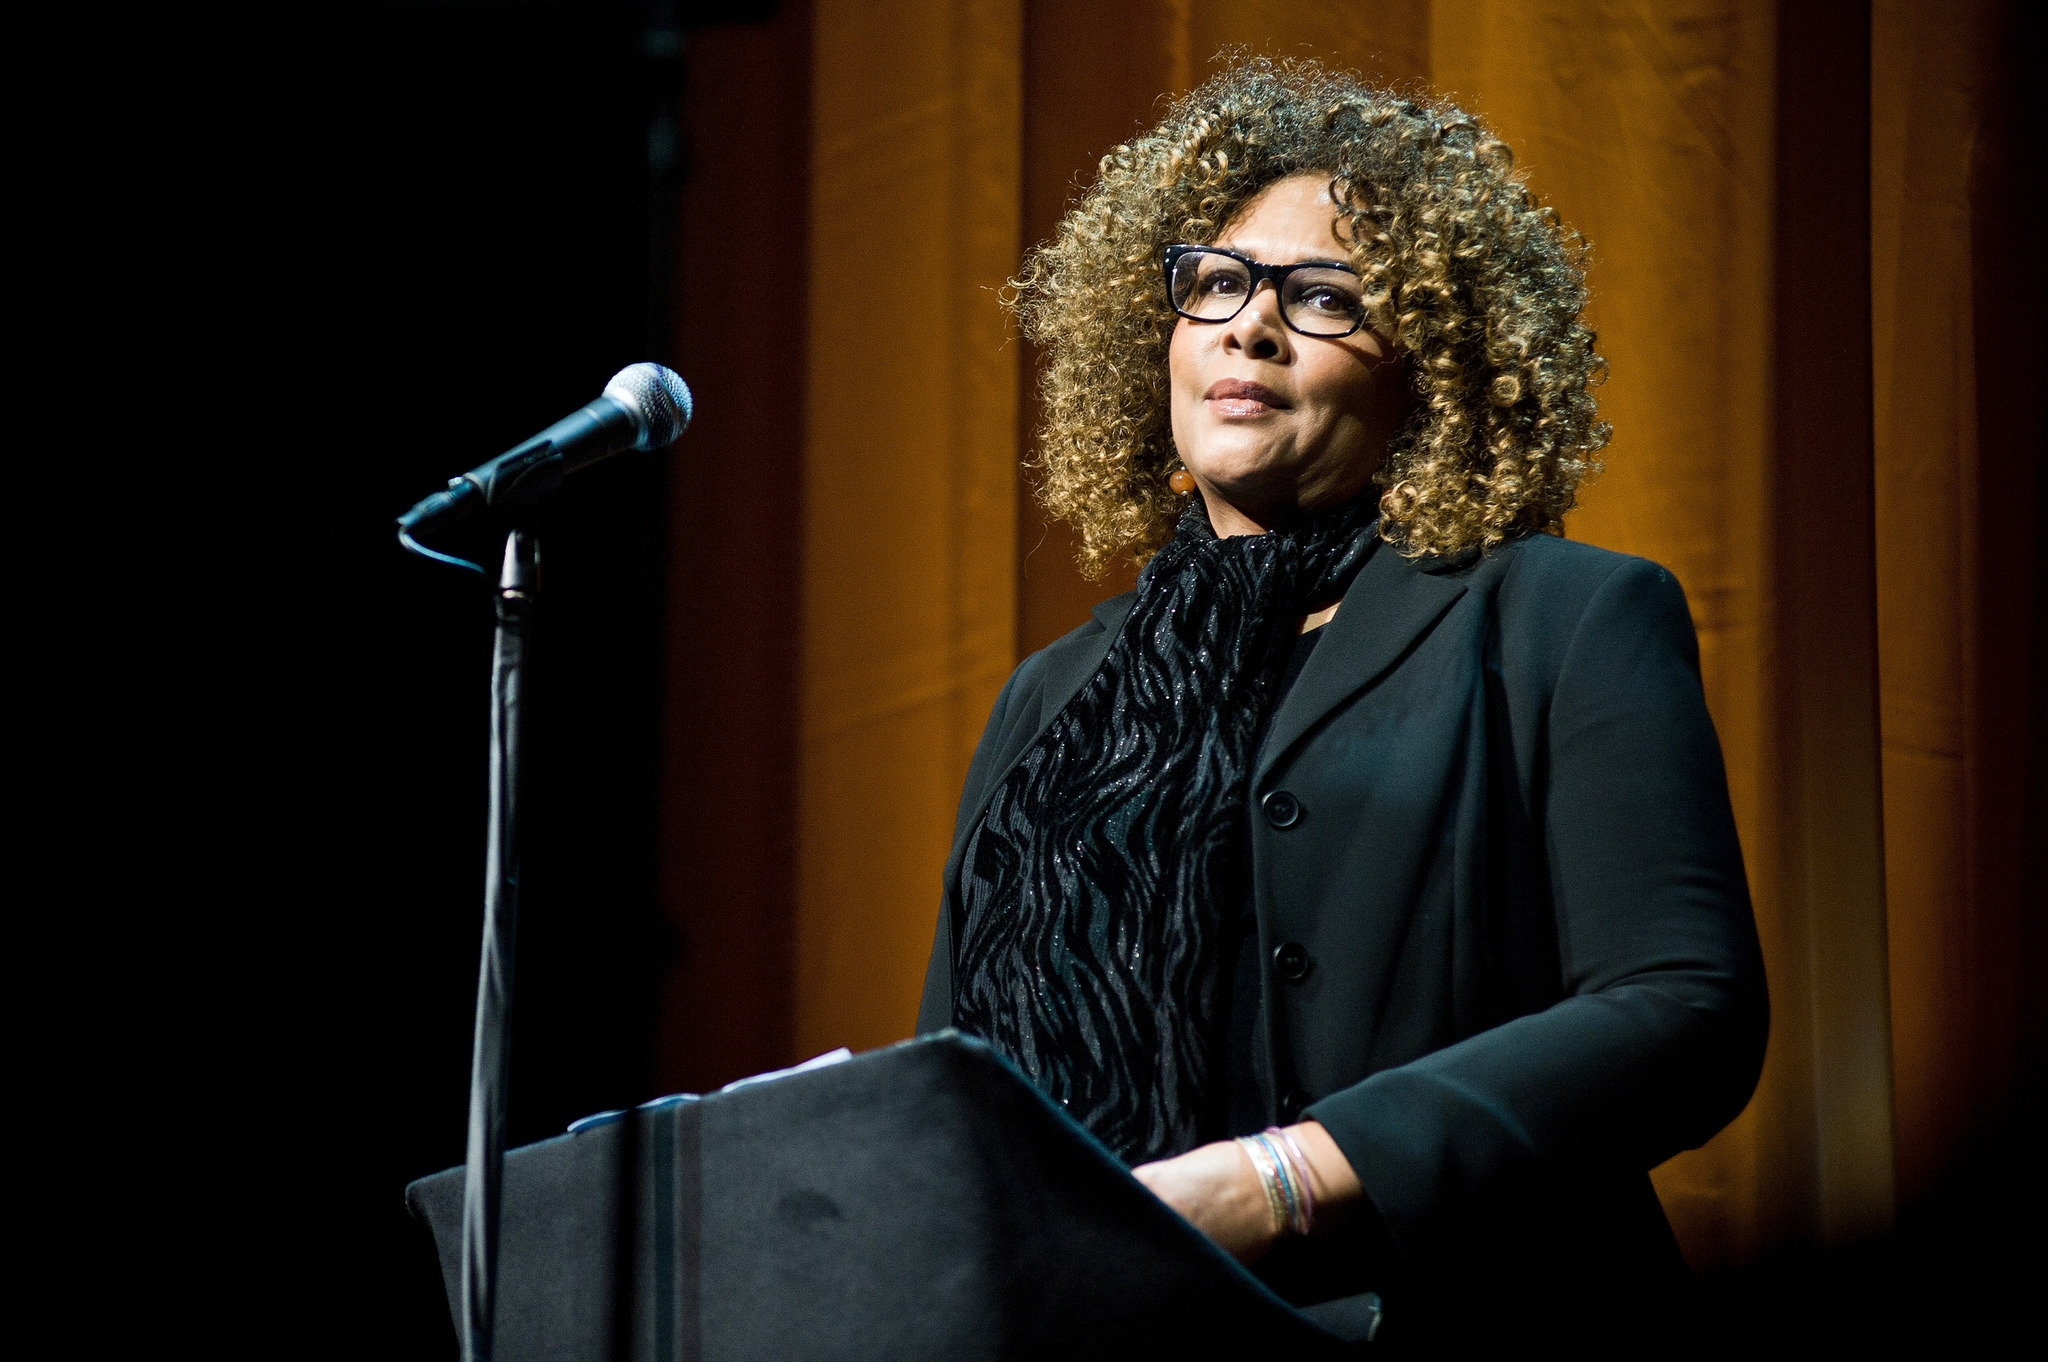 Director Julie Dash attends the Roger Ebert Memorial Tribute at Chicago Theatre on April 11, 2013 in Chicago, Illinois.